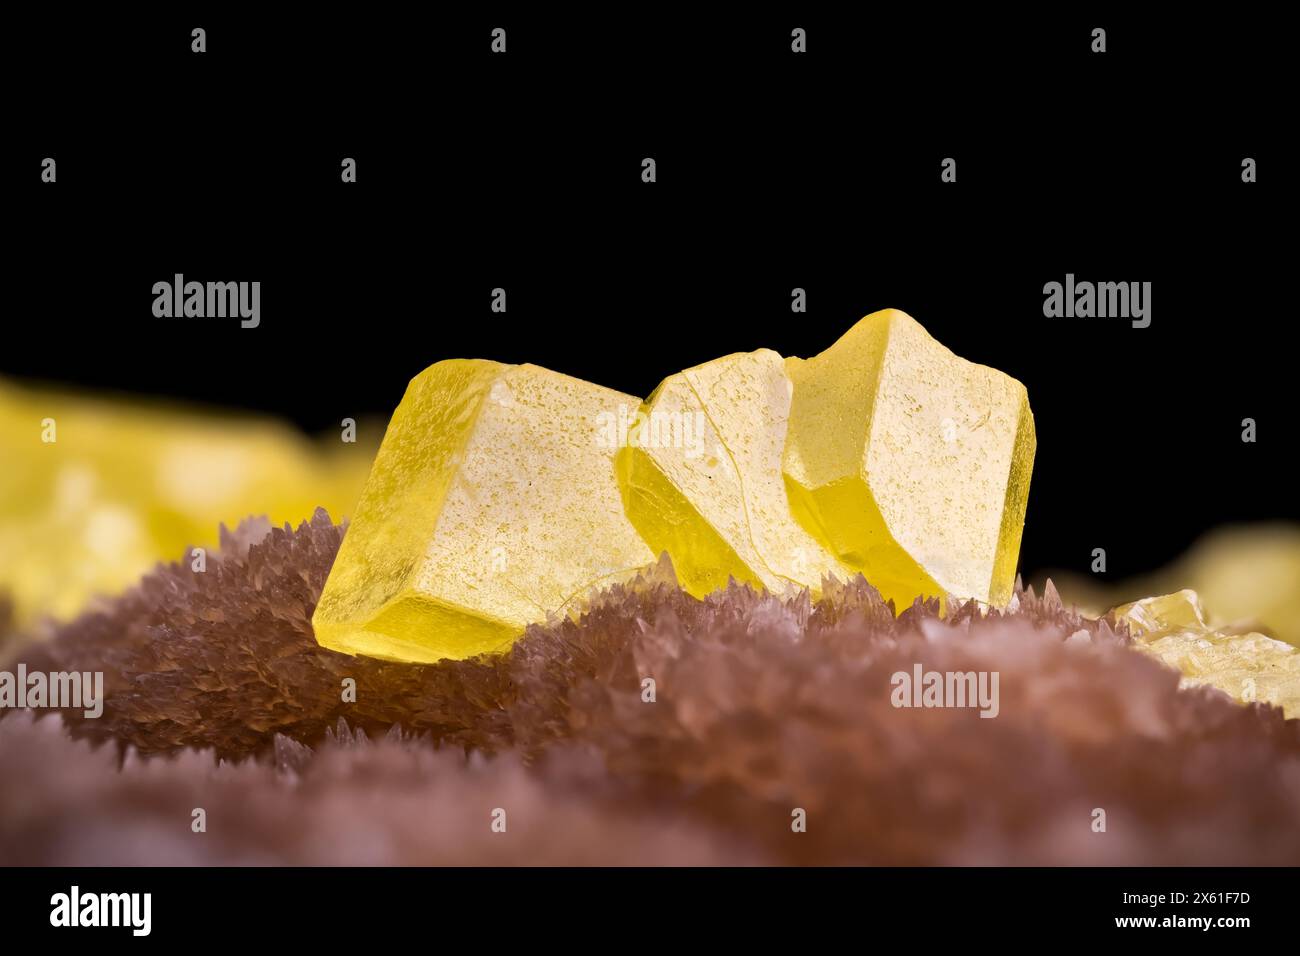 Yellow sulphur crystal on brown calcite. macro photography detail texture background. close-up raw rough unpolished semi-precious gemstone Stock Photo